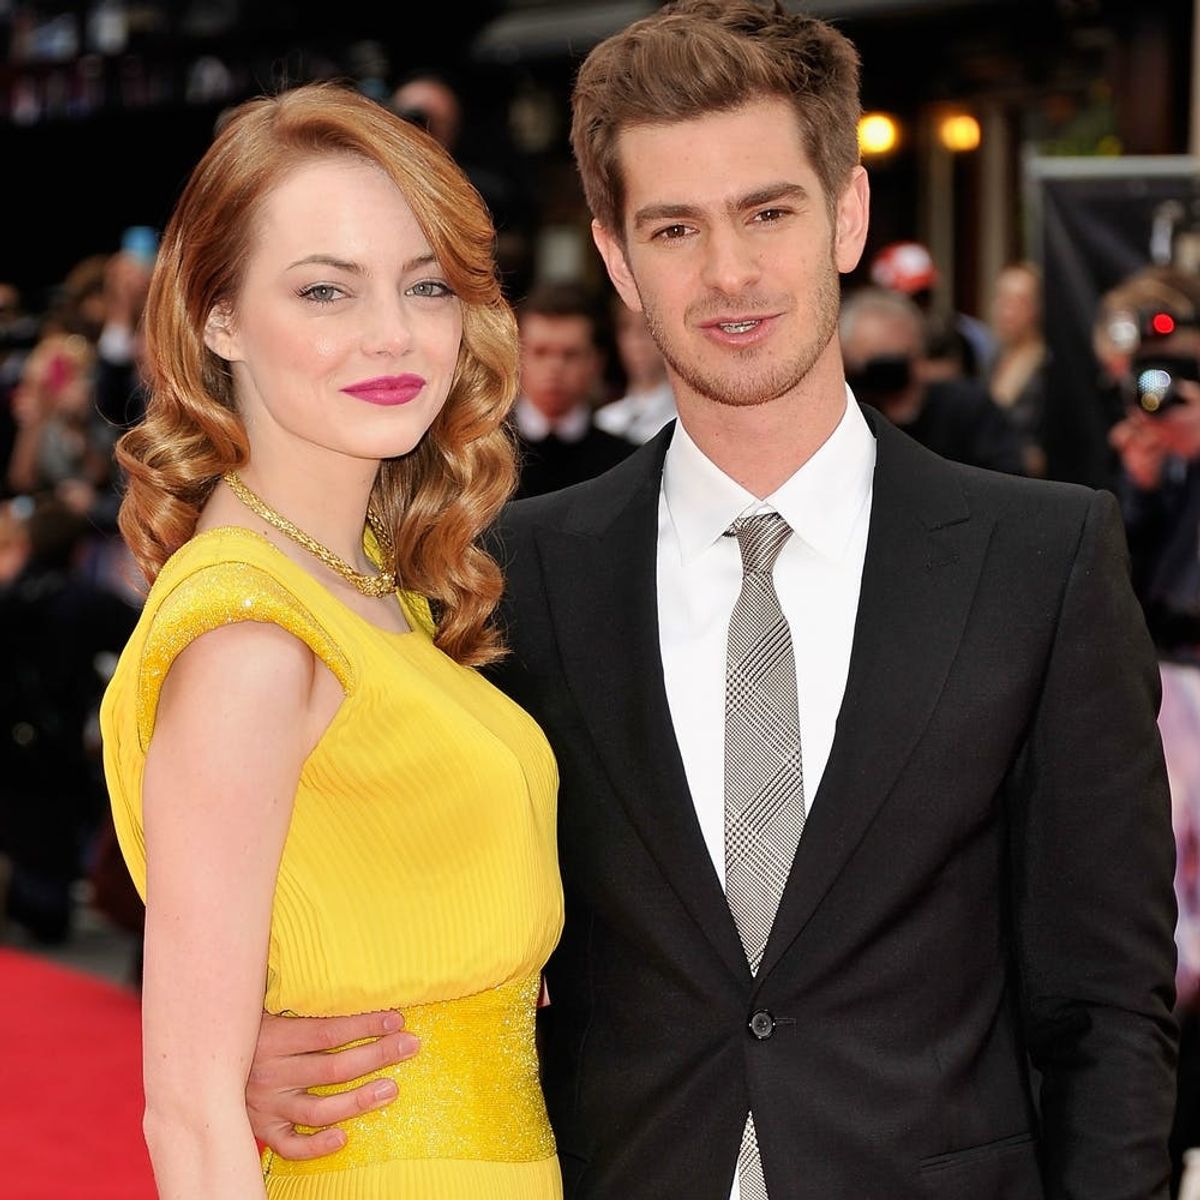 Andrew Garfield Just Gave Us All Hope for an Emma Stone Reconciliation